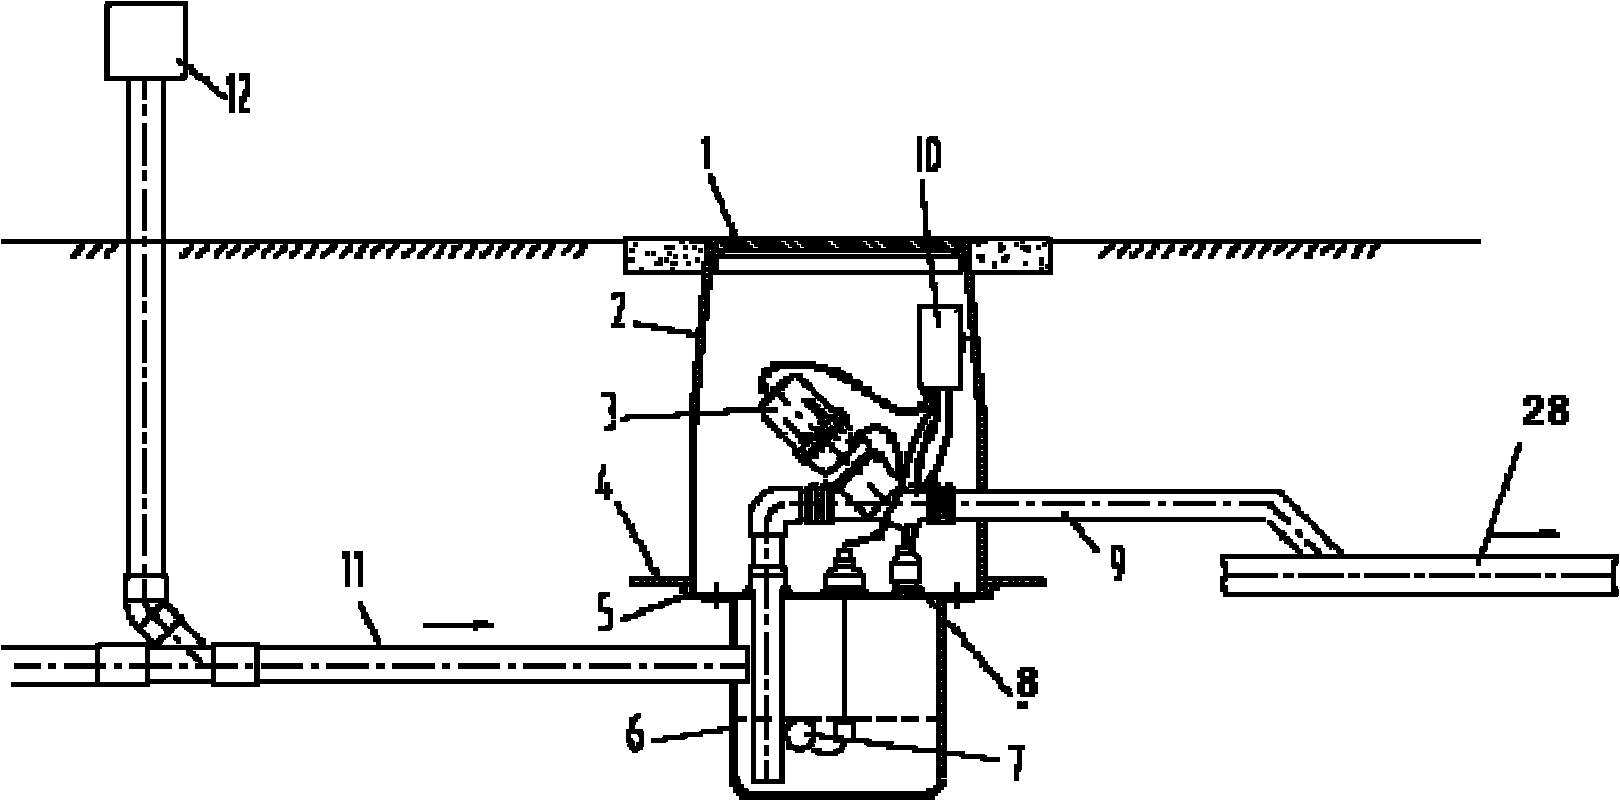 Sewage collecting and discharging device